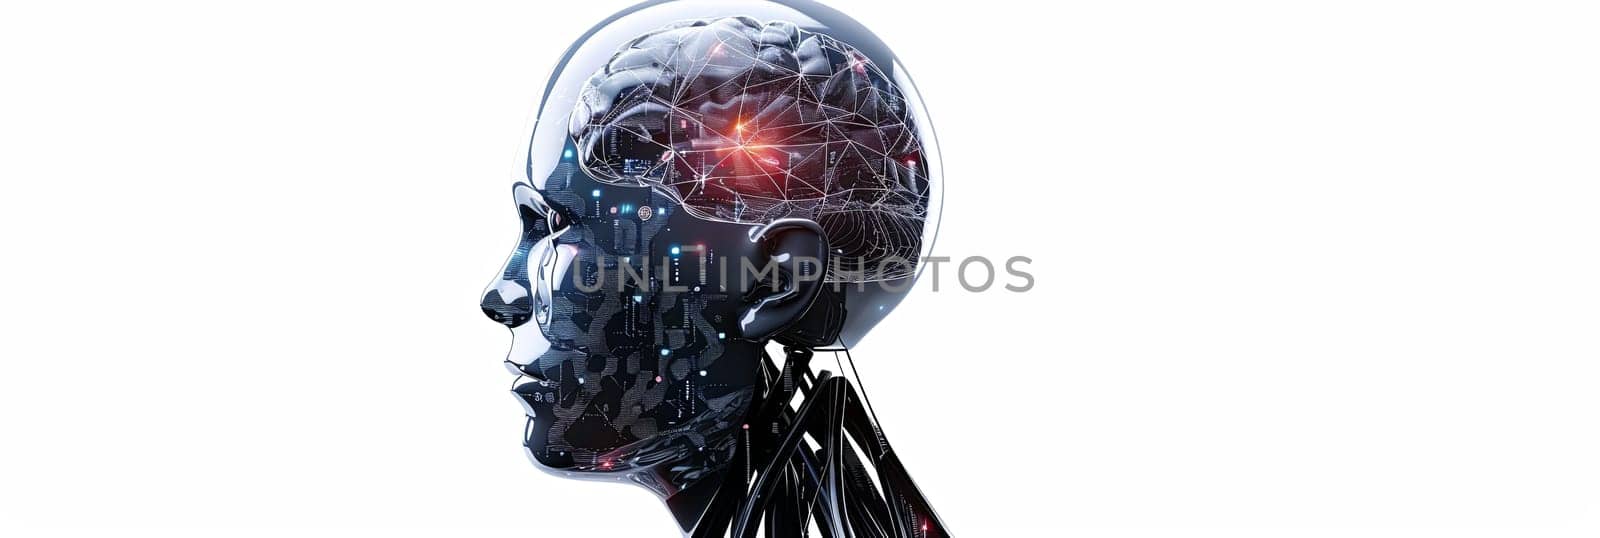 A 3D rendering of a robotic head with a transparent skull revealing a complex digital brain engine.